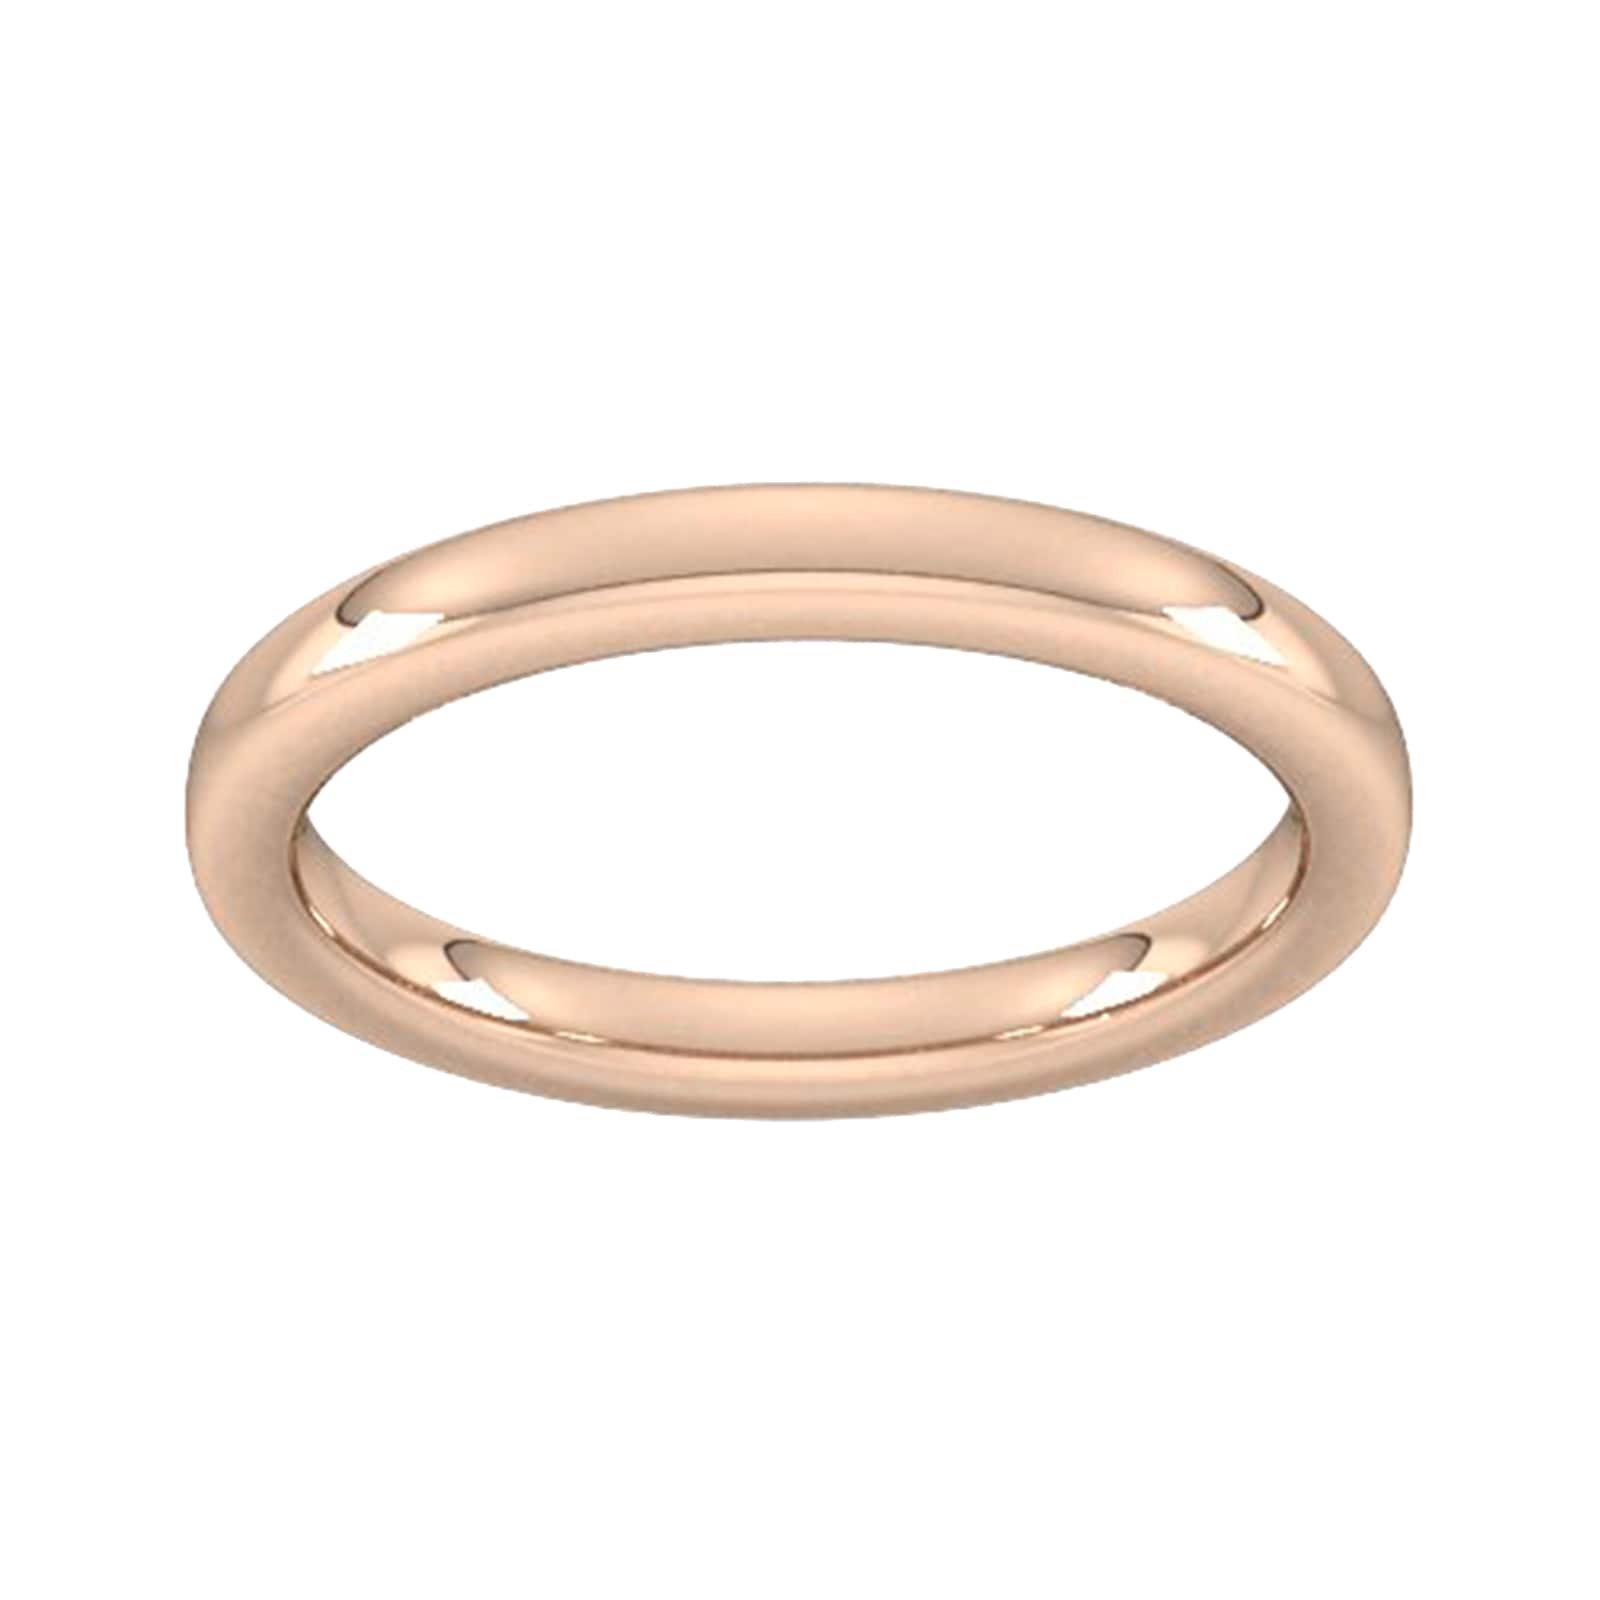 2.5mm Slight Court Extra Heavy Wedding Ring In 9 Carat Rose Gold - Ring Size J